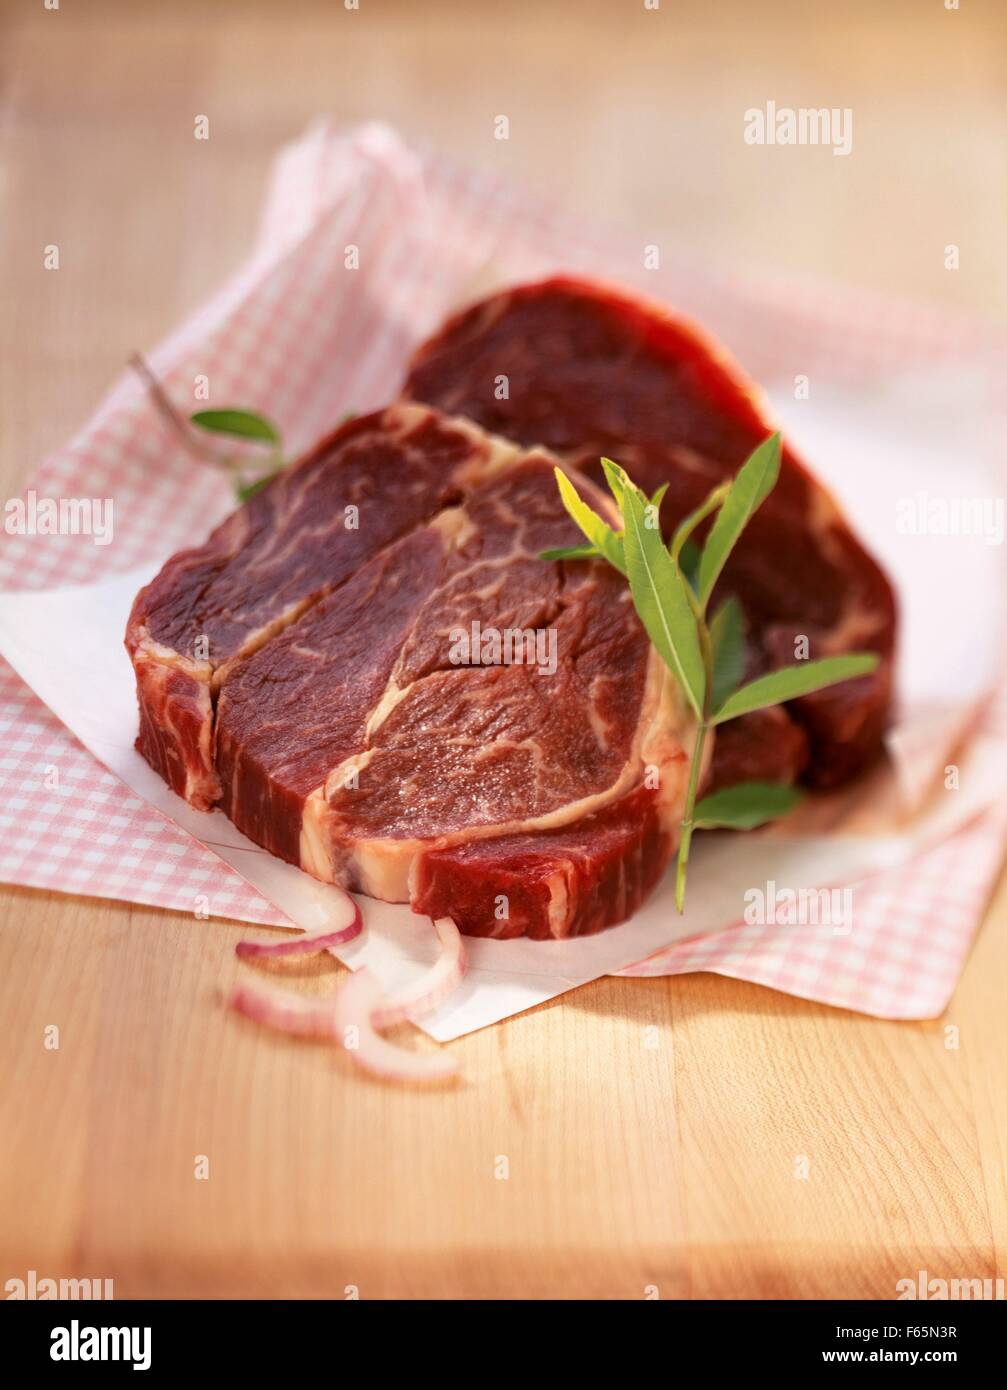 Beef from Argentina Stock Photo